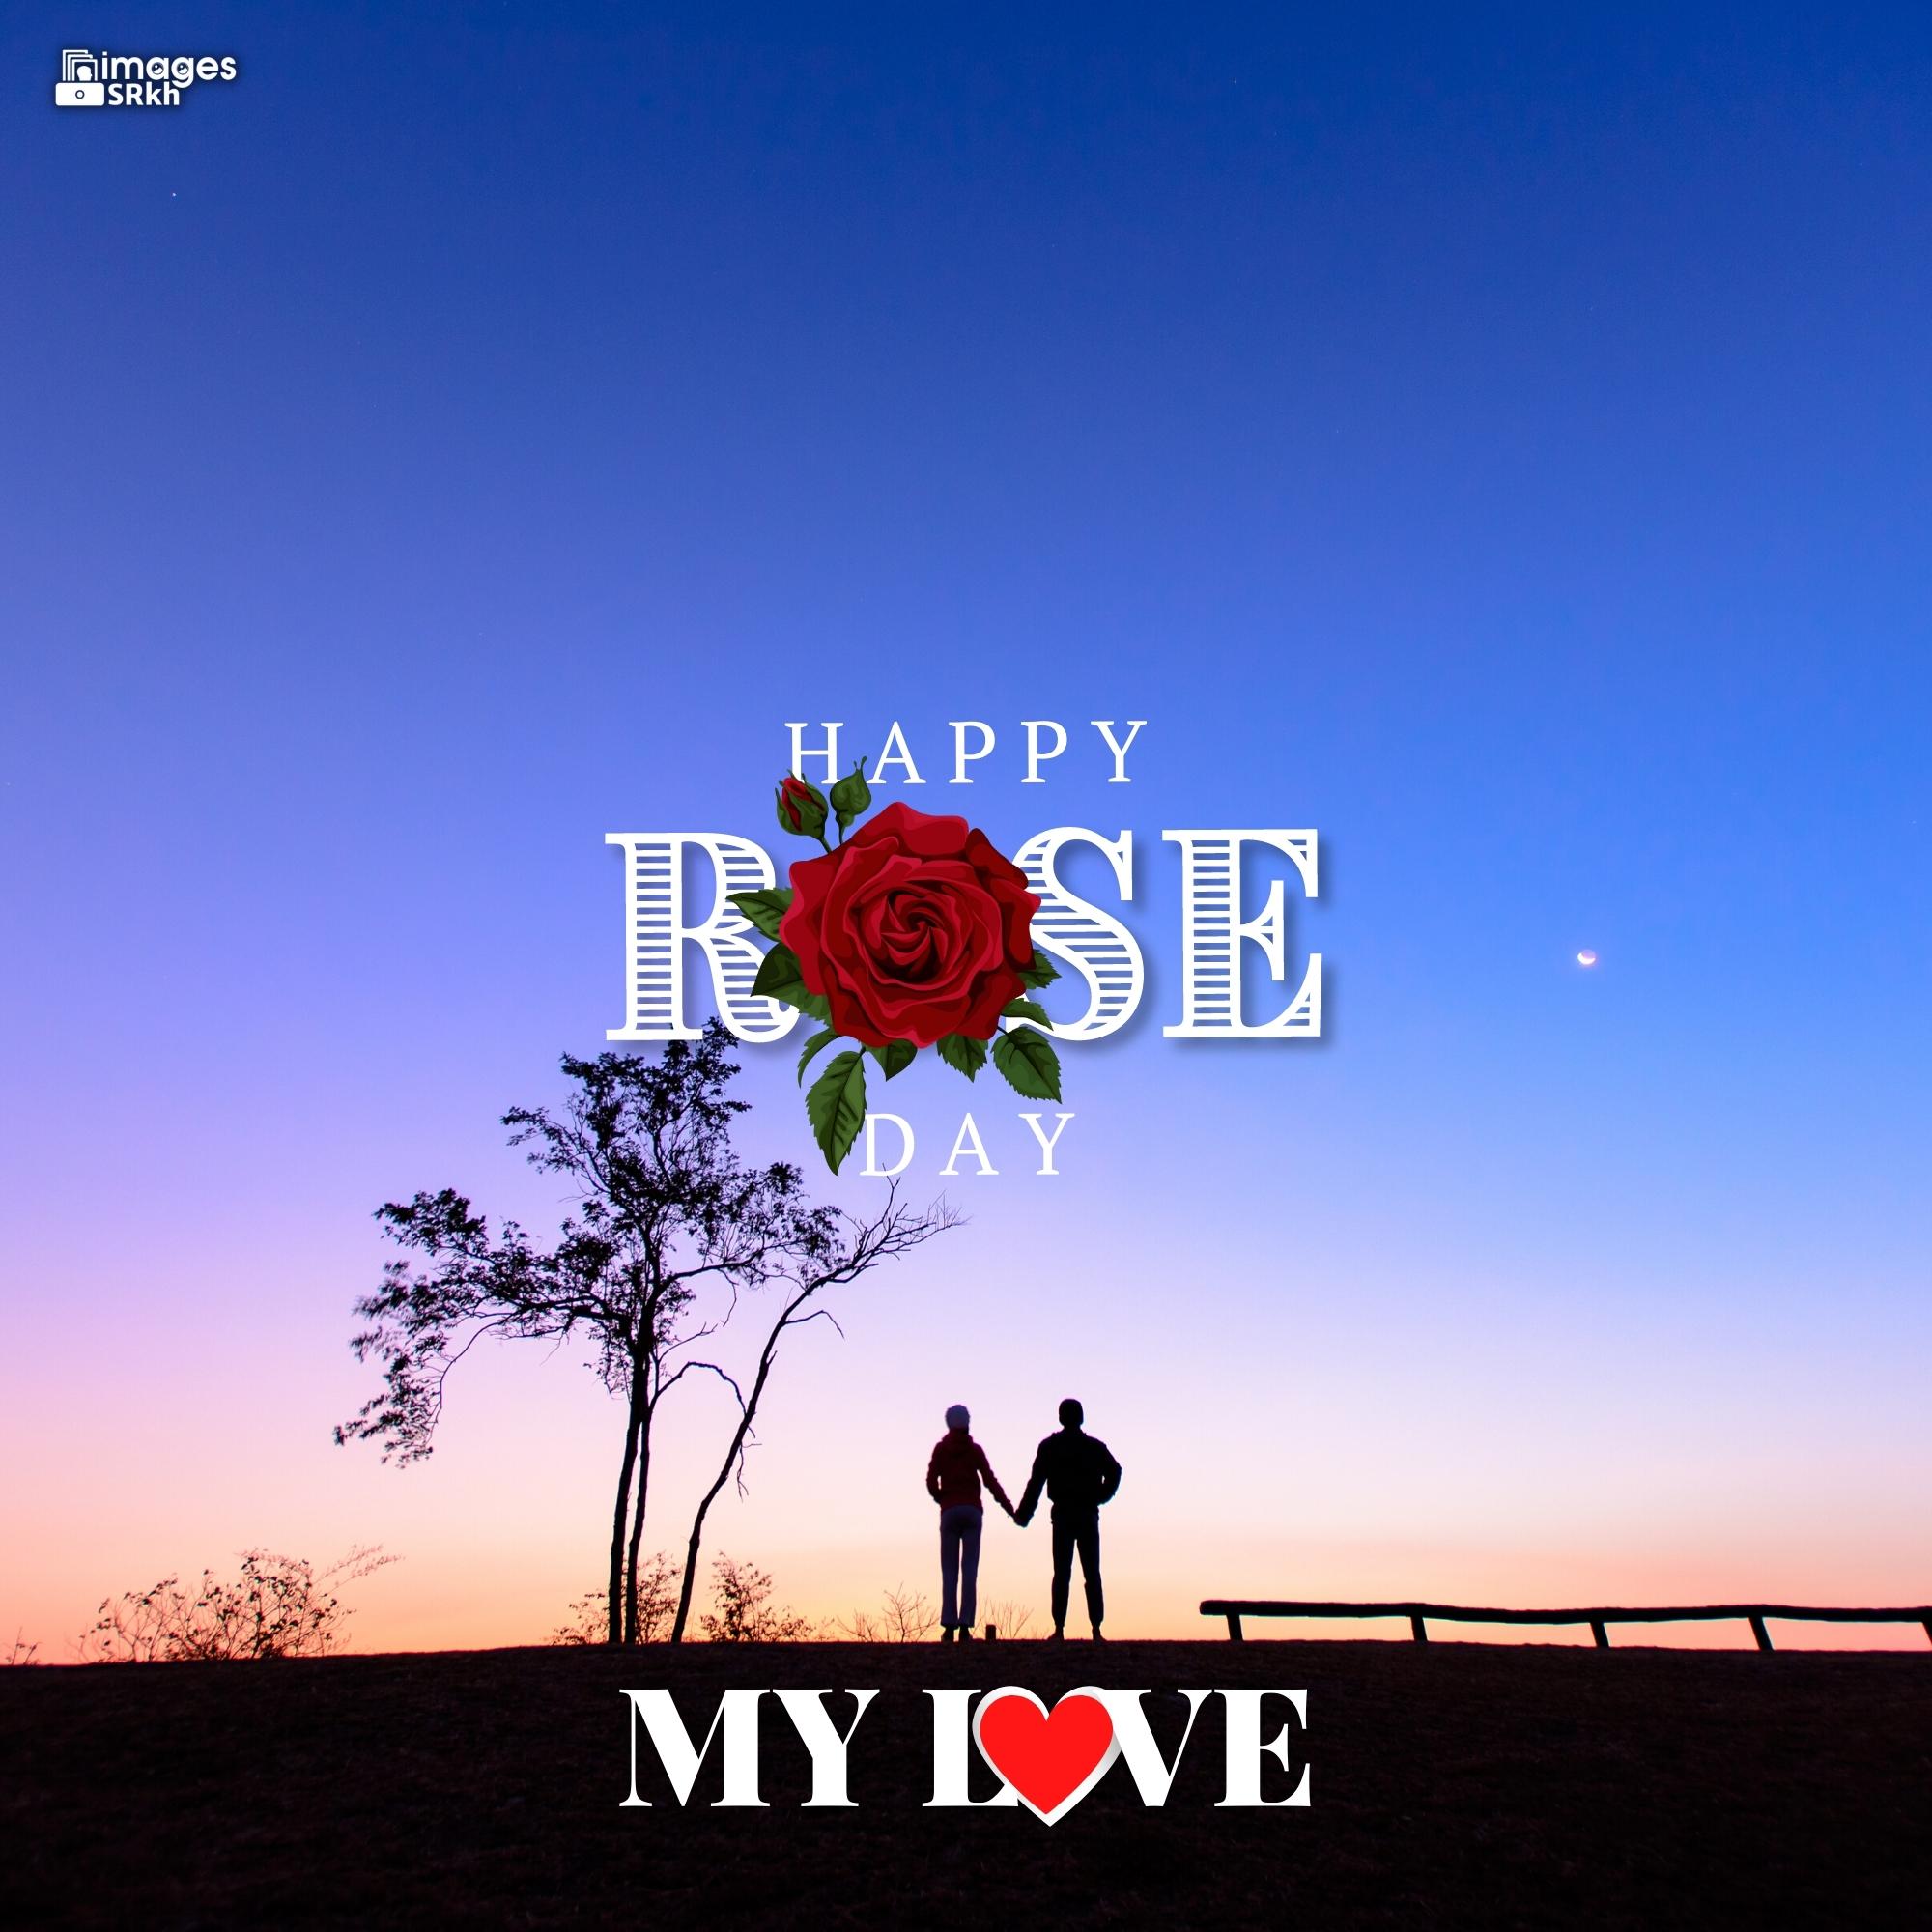 Happy Rose Day My Love (26) | HD IMAGES